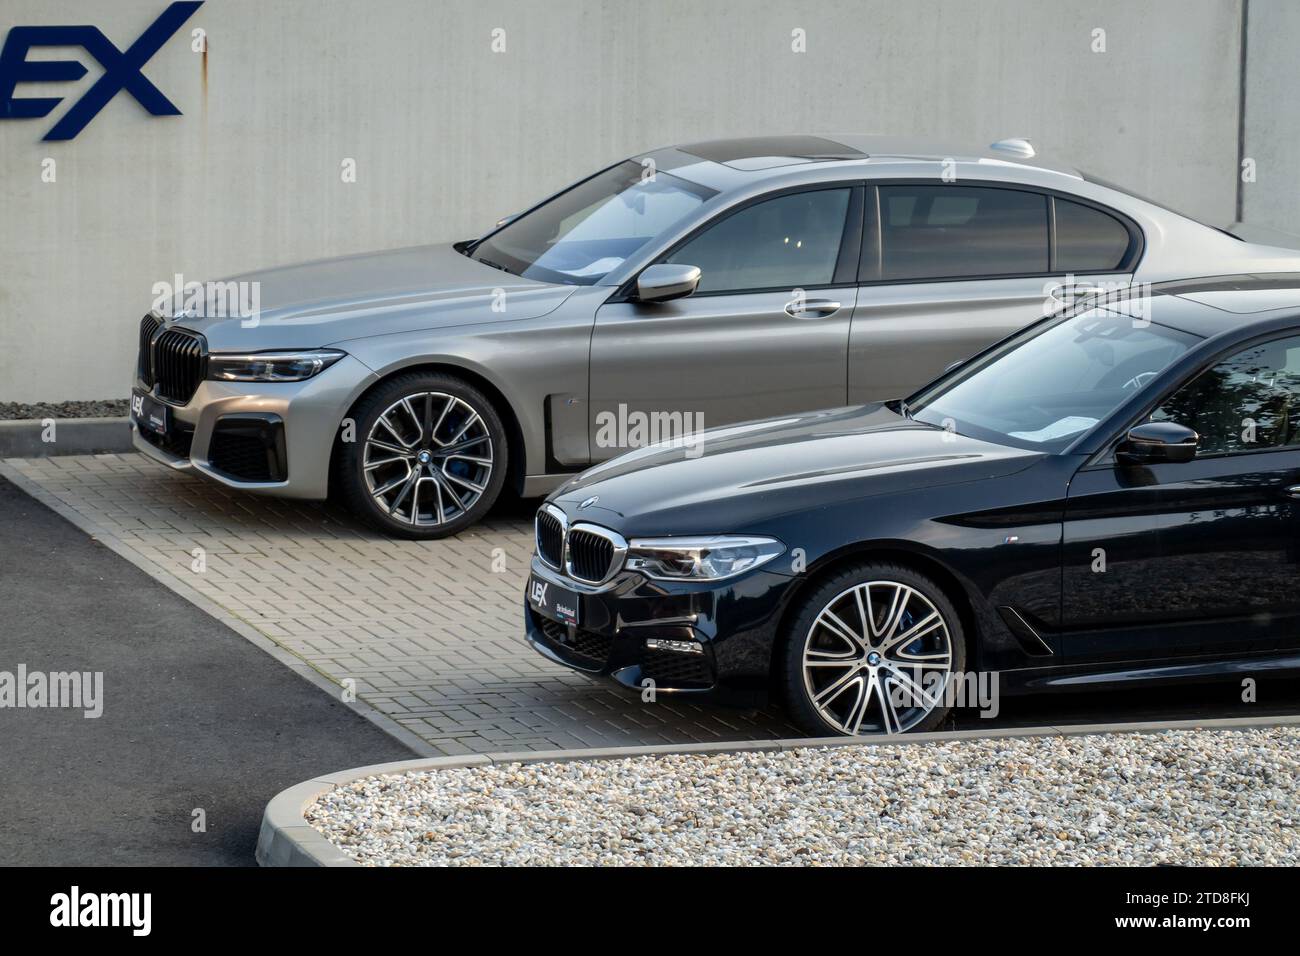 https://c8.alamy.com/comp/2TD8FKJ/ostrava-czech-republic-august-23-2023-bmw-7-series-luxury-saloon-of-g11-g12-generation-in-silver-colour-and-bmw-5-series-g30-presented-at-dealers-2TD8FKJ.jpg